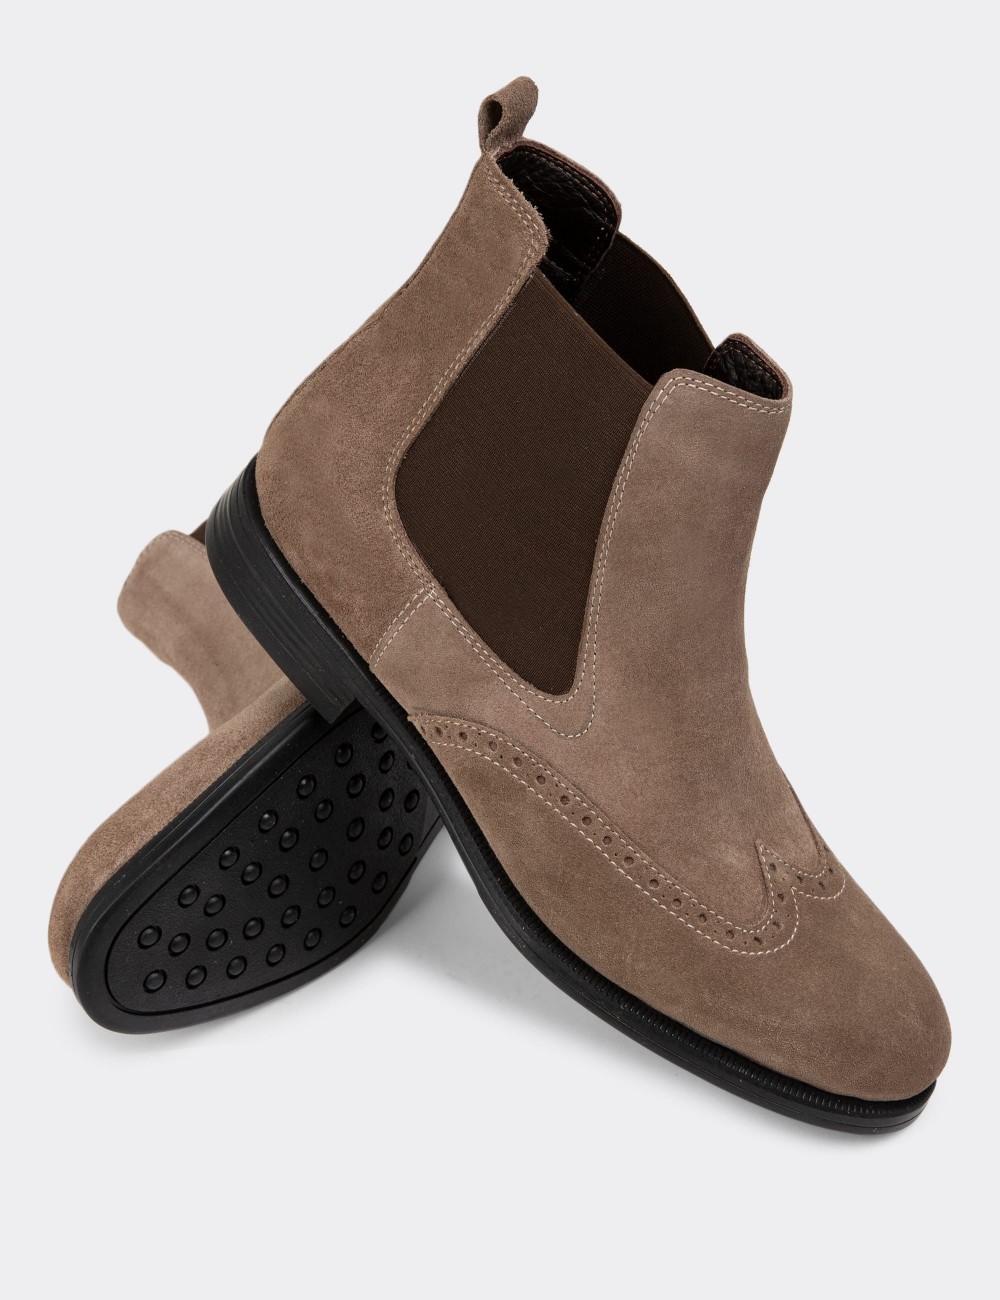 Sandstone Suede Leather Chelsea Boots - 01920MVZNC01